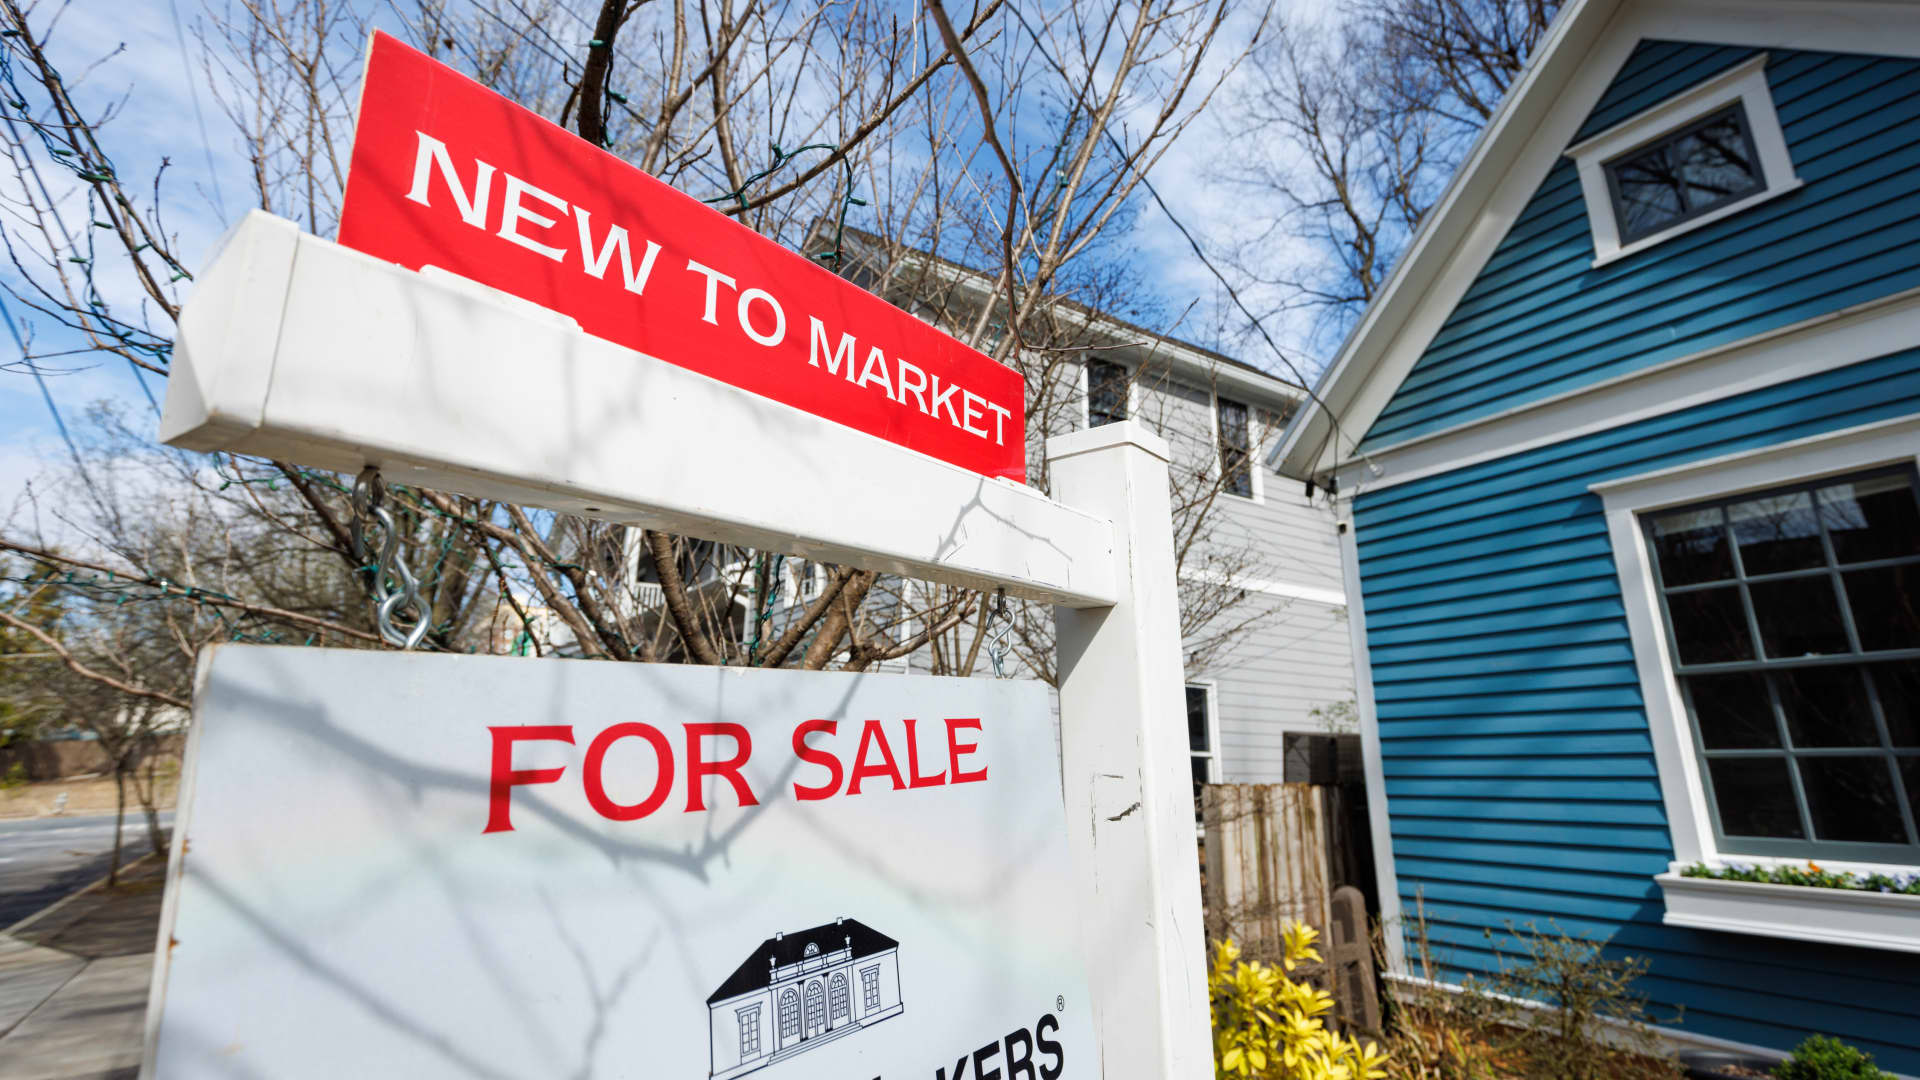 Mortgage demand recovers slightly, despite rising rates